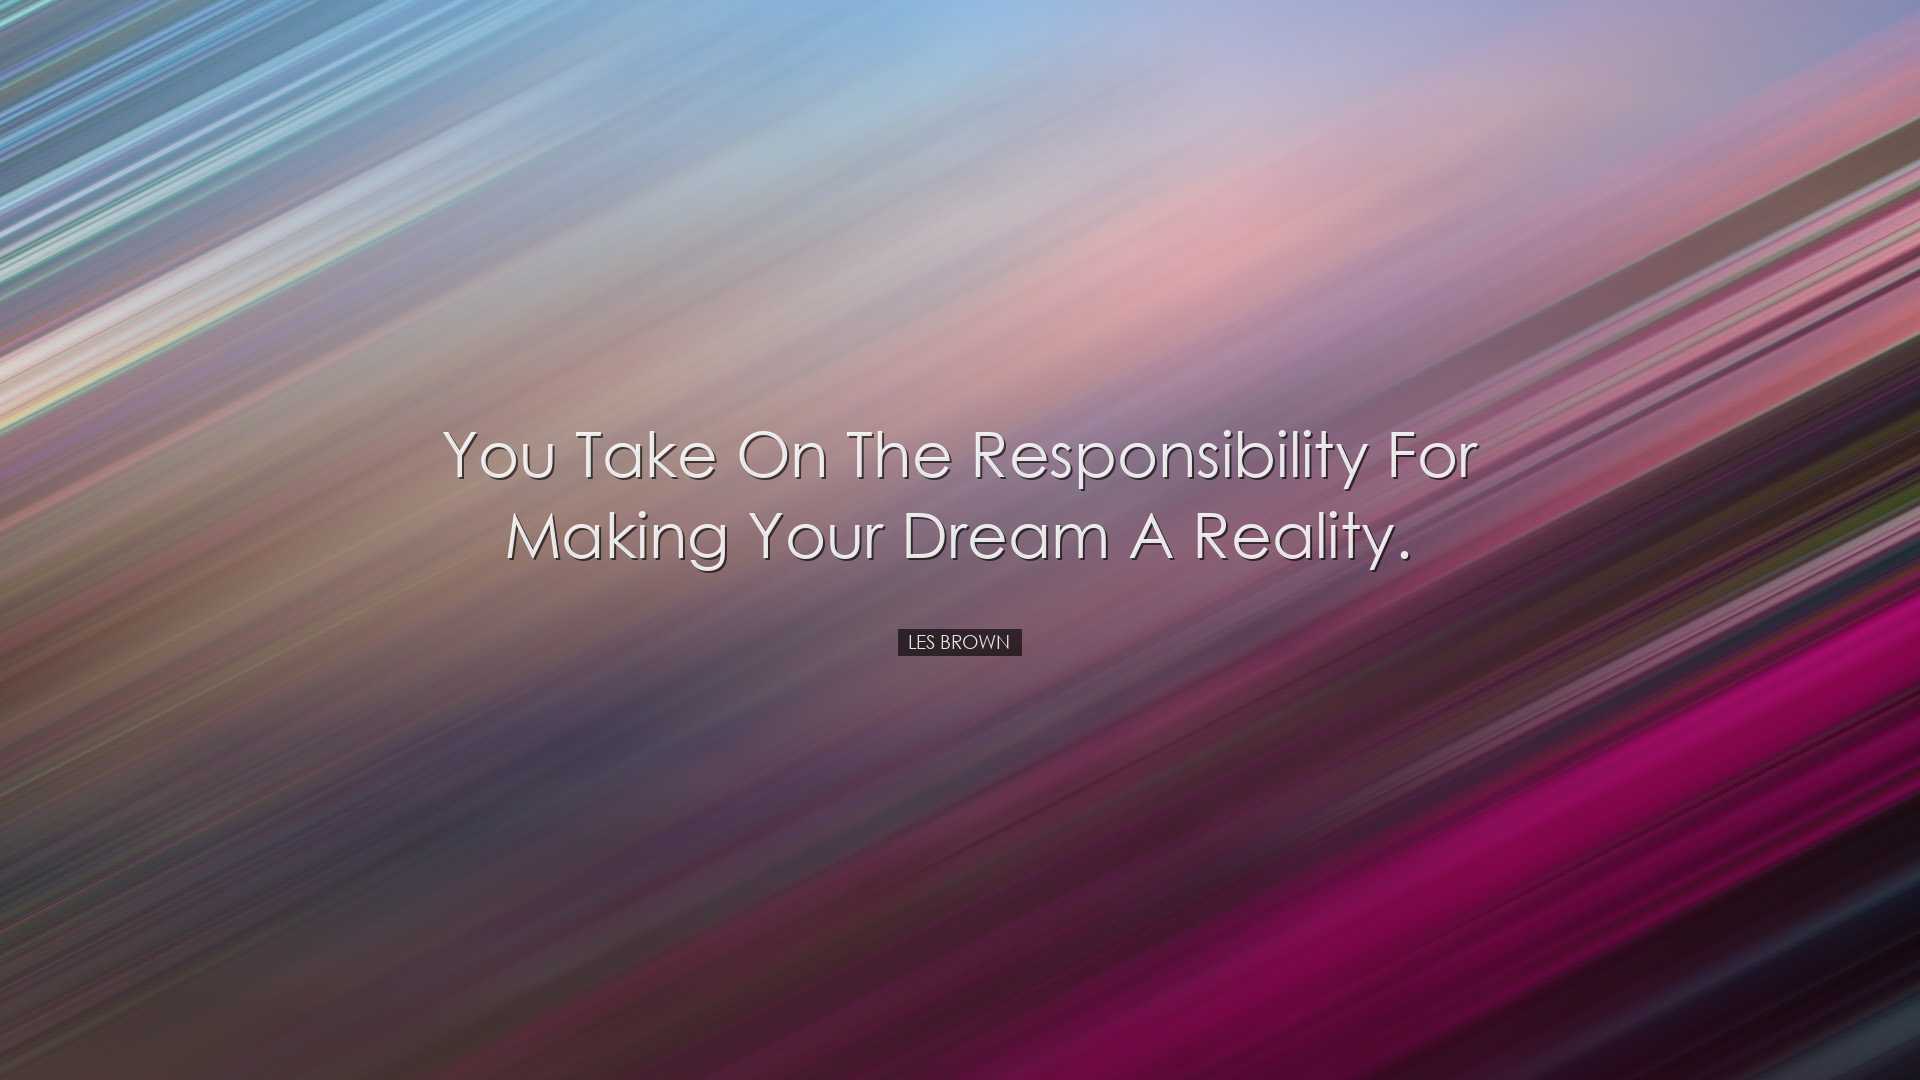 You take on the responsibility for making your dream a reality. -